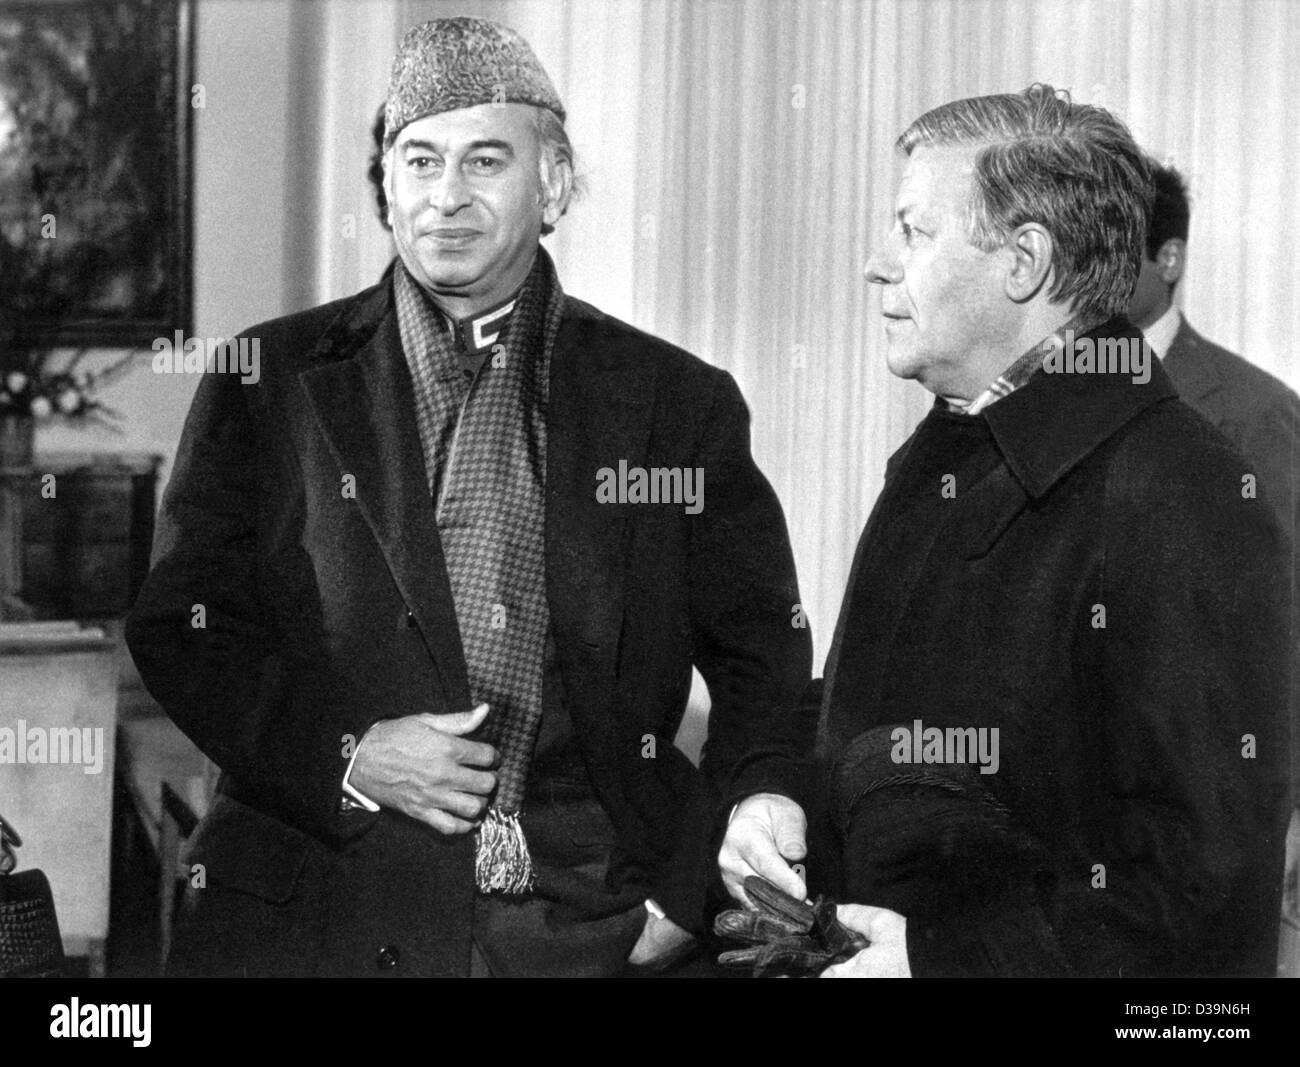 (dpa) - Zulfikar Ali Bhutto (L), Pakistani Prime Minister, on his visit with German Chancellor Helmut Schmidt (R) in Bonn/Germany, 18 February 1976. Bhutto came to power after the elections in West Pakistan in 1970 (East Pakistan then became Bangladesh) and ruled the country successfully until 1977. Stock Photo